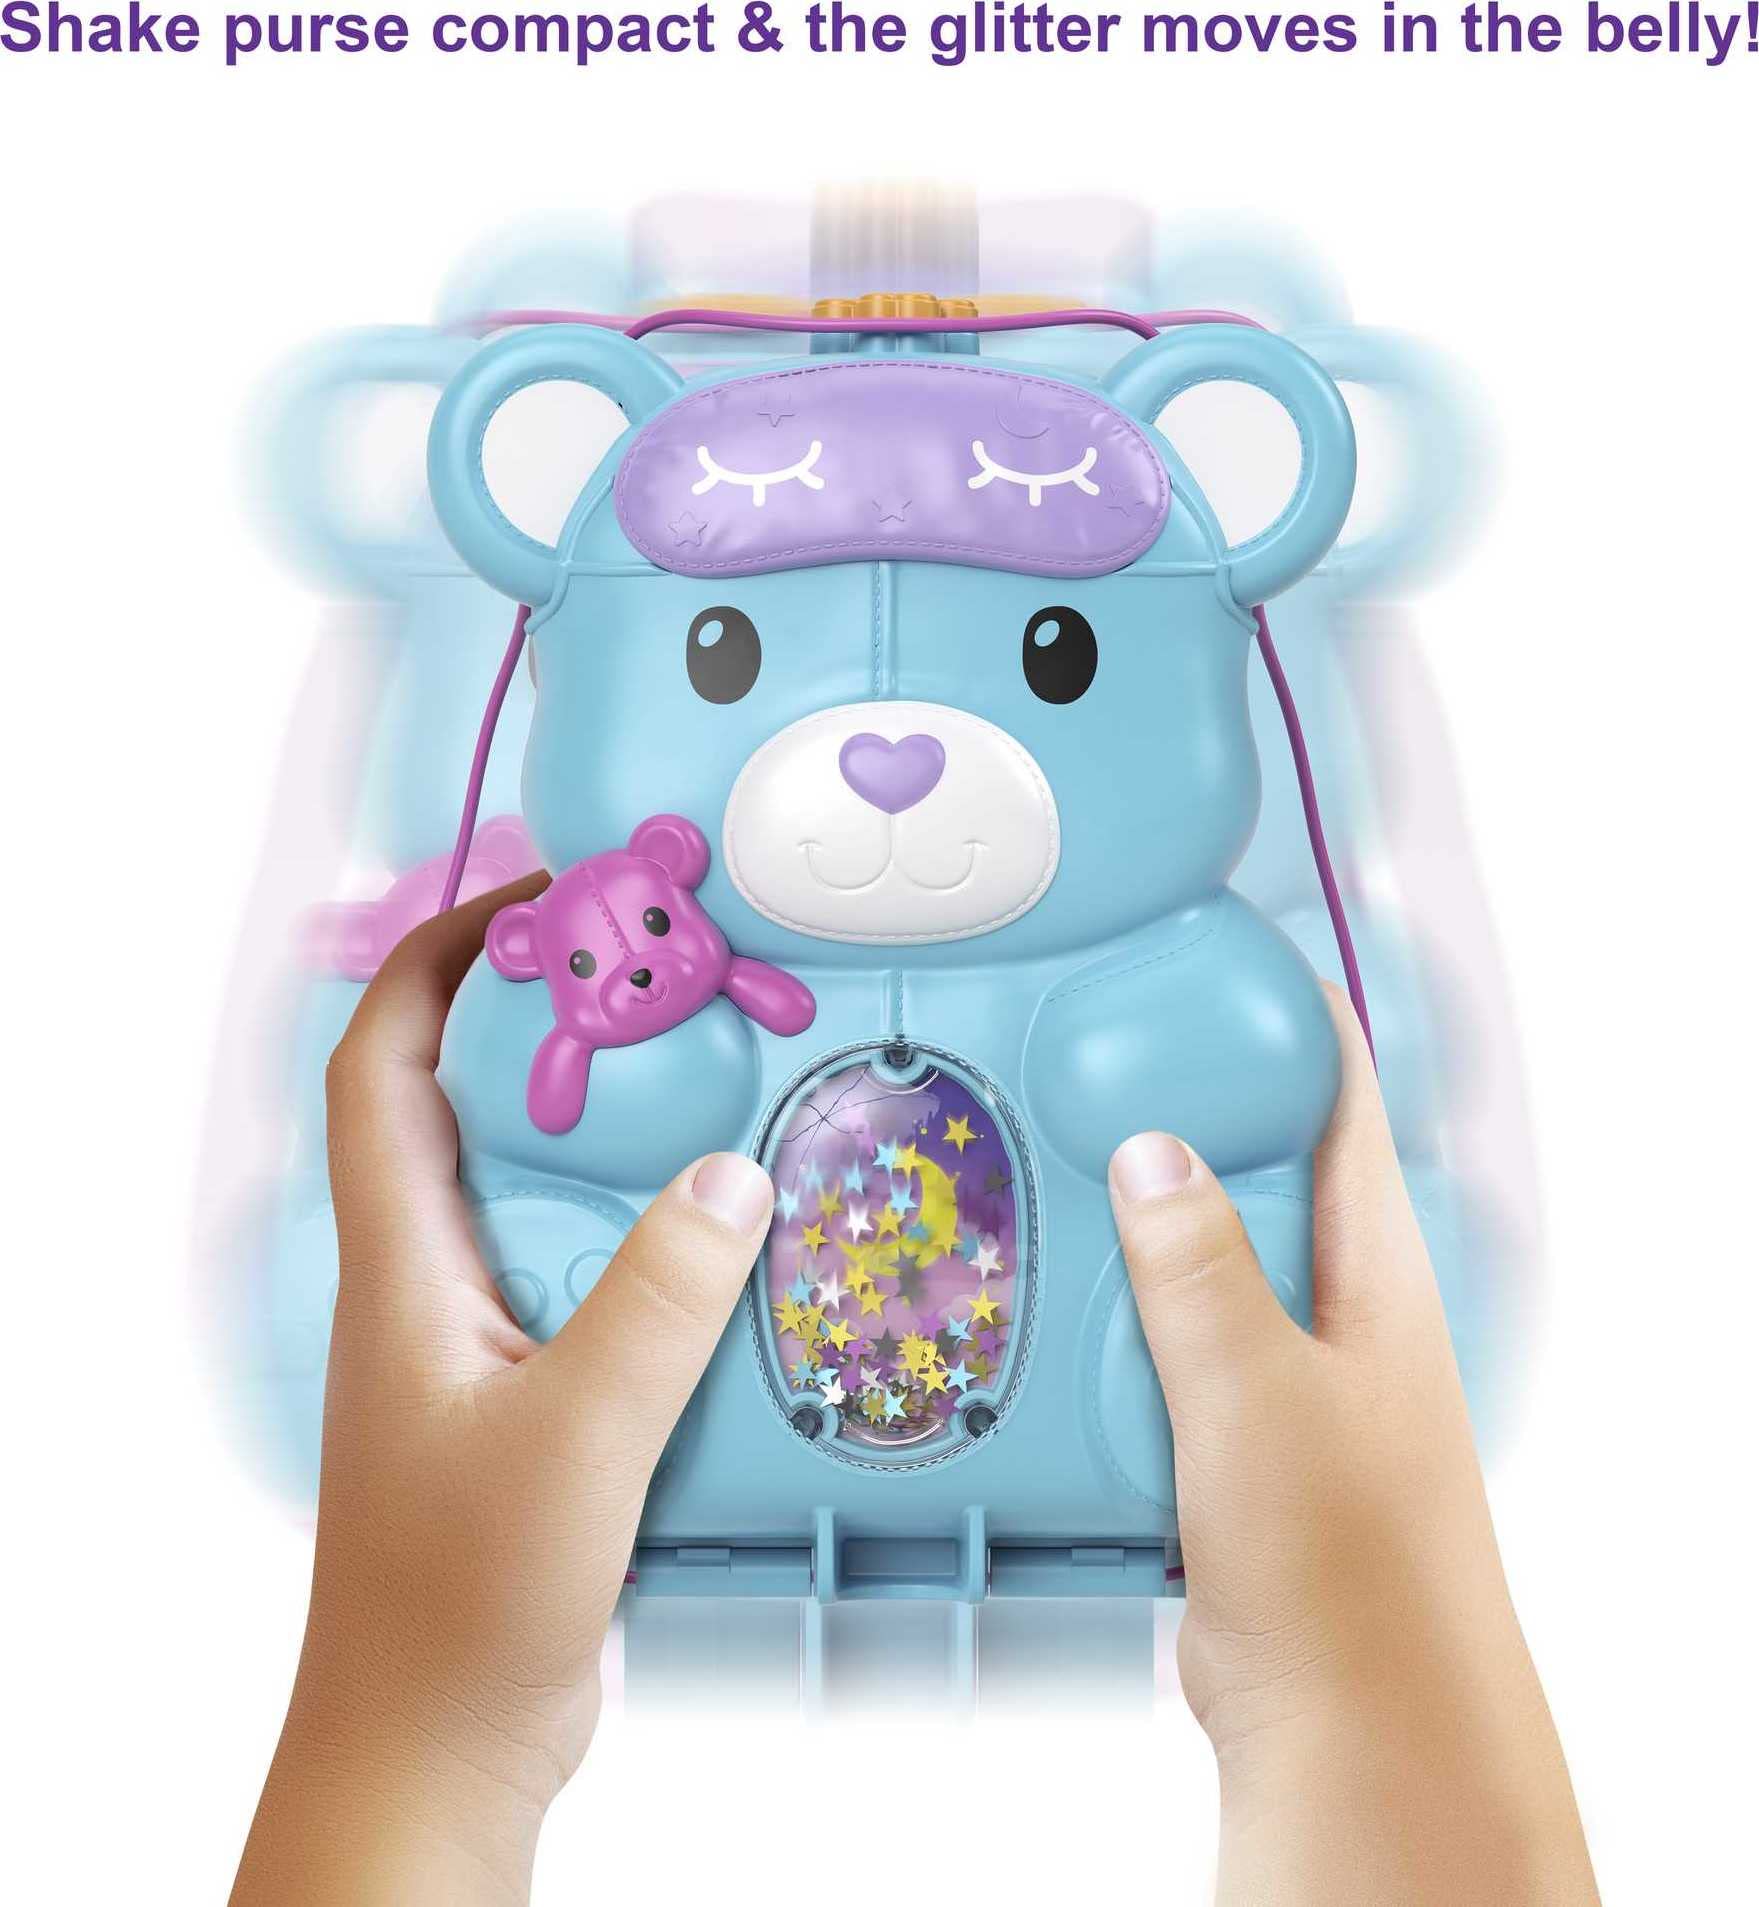 Polly Pocket 2-In-1 Travel Toy, 2 Micro Dolls and 16 Accessories, Teddy Bear Purse Playset with Sleepover Theme